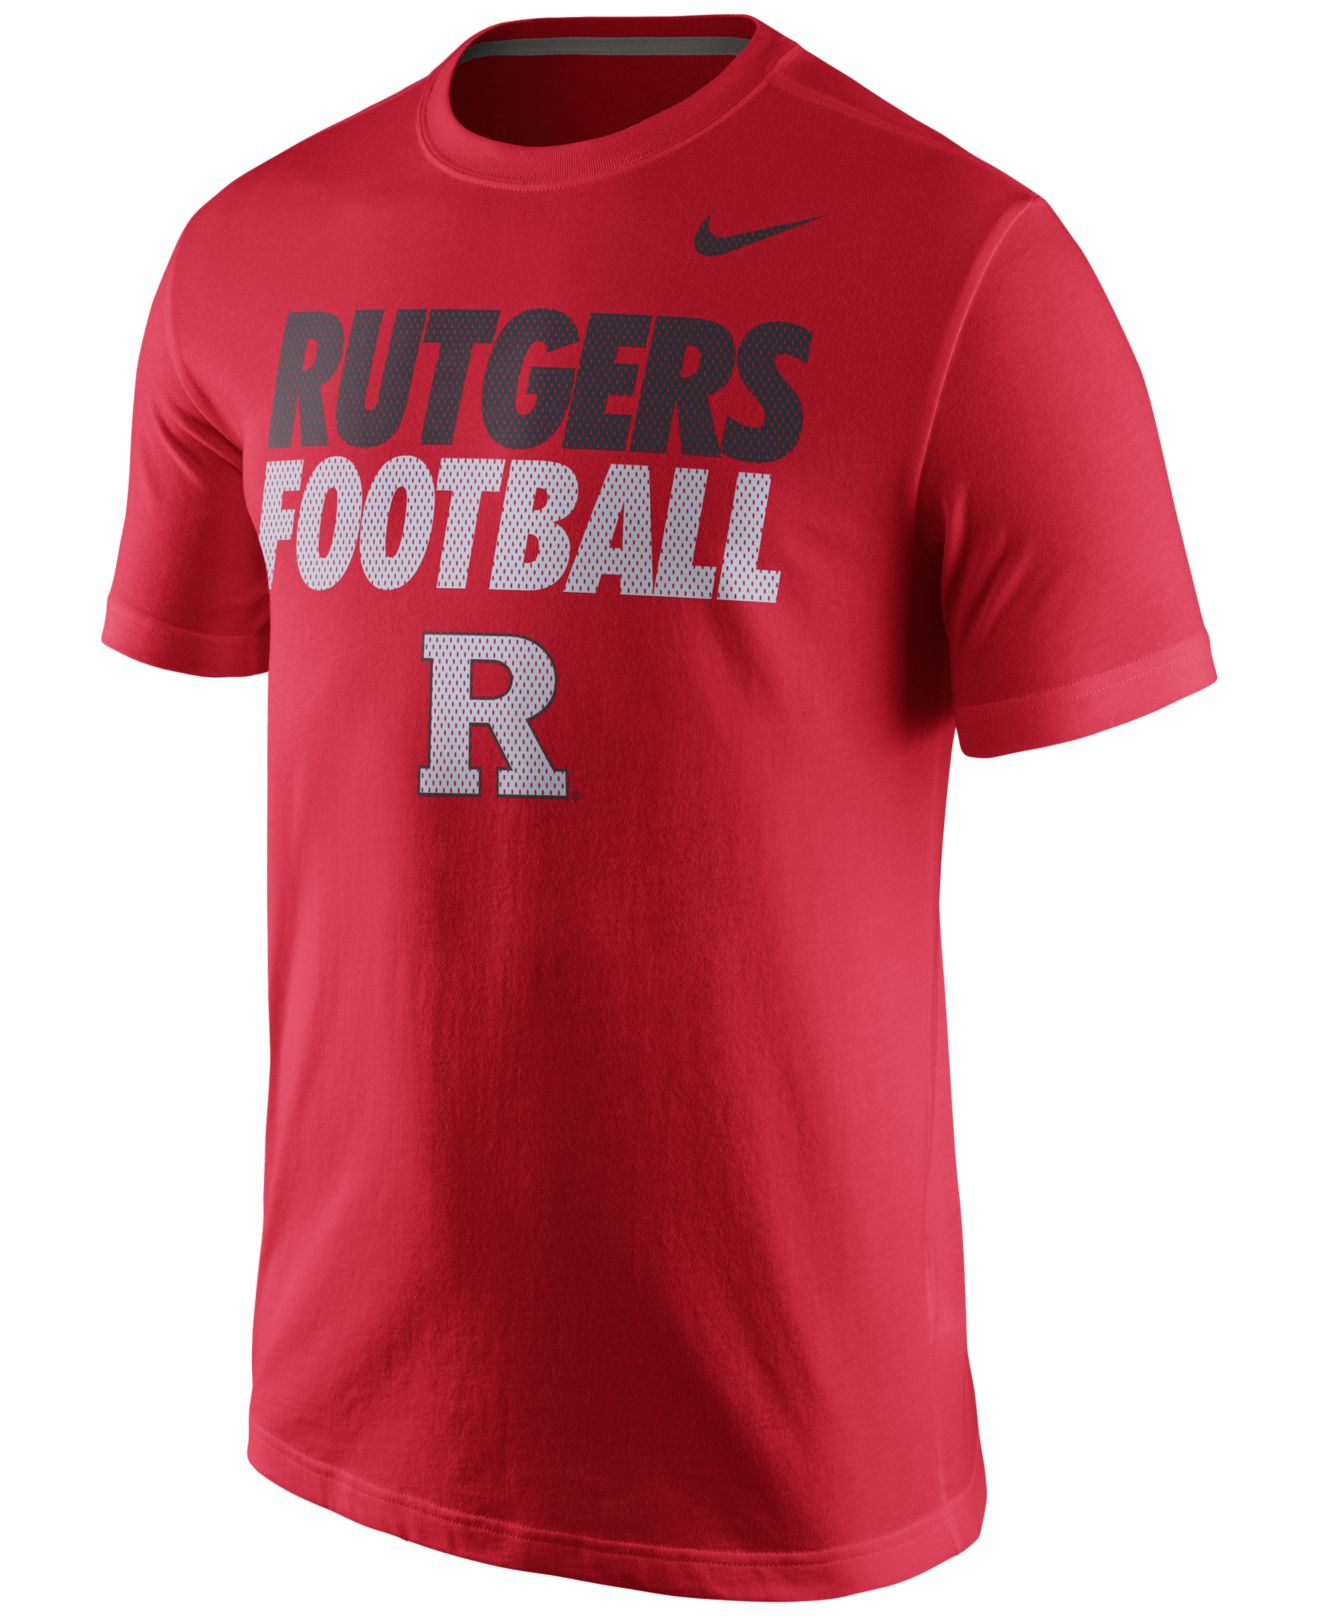 Lyst - Nike Men's Rutgers Scarlet Knights Practice T-shirt in Red for Men